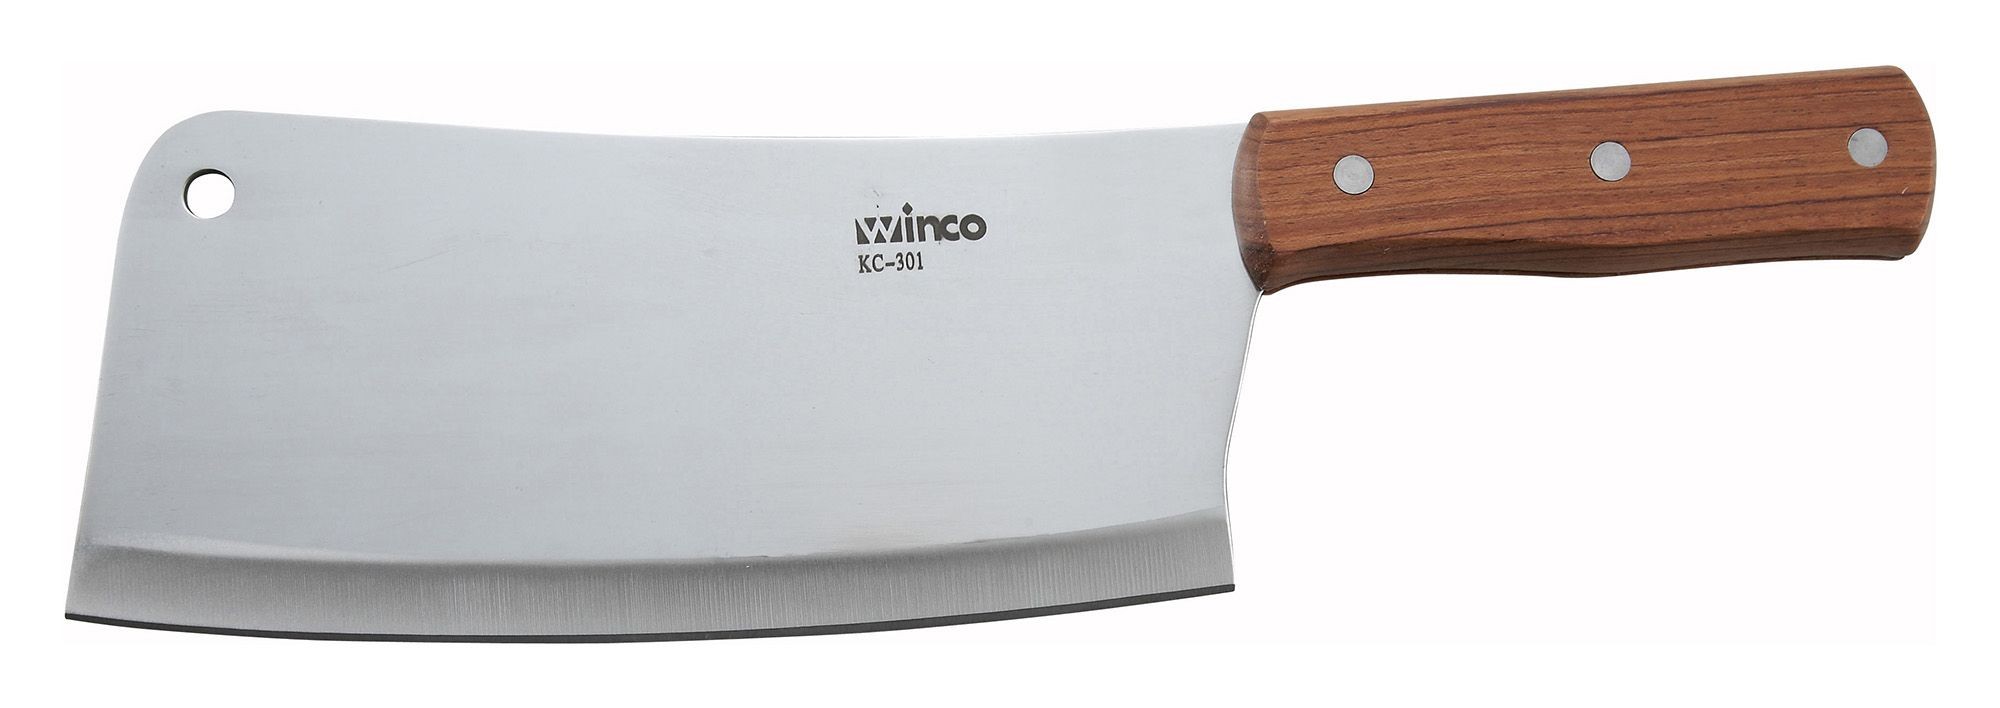 https://www.lionsdeal.com/itempics/Heavy-Duty-Chinese-Cleaver-Wit-27835_xlarge.jpg